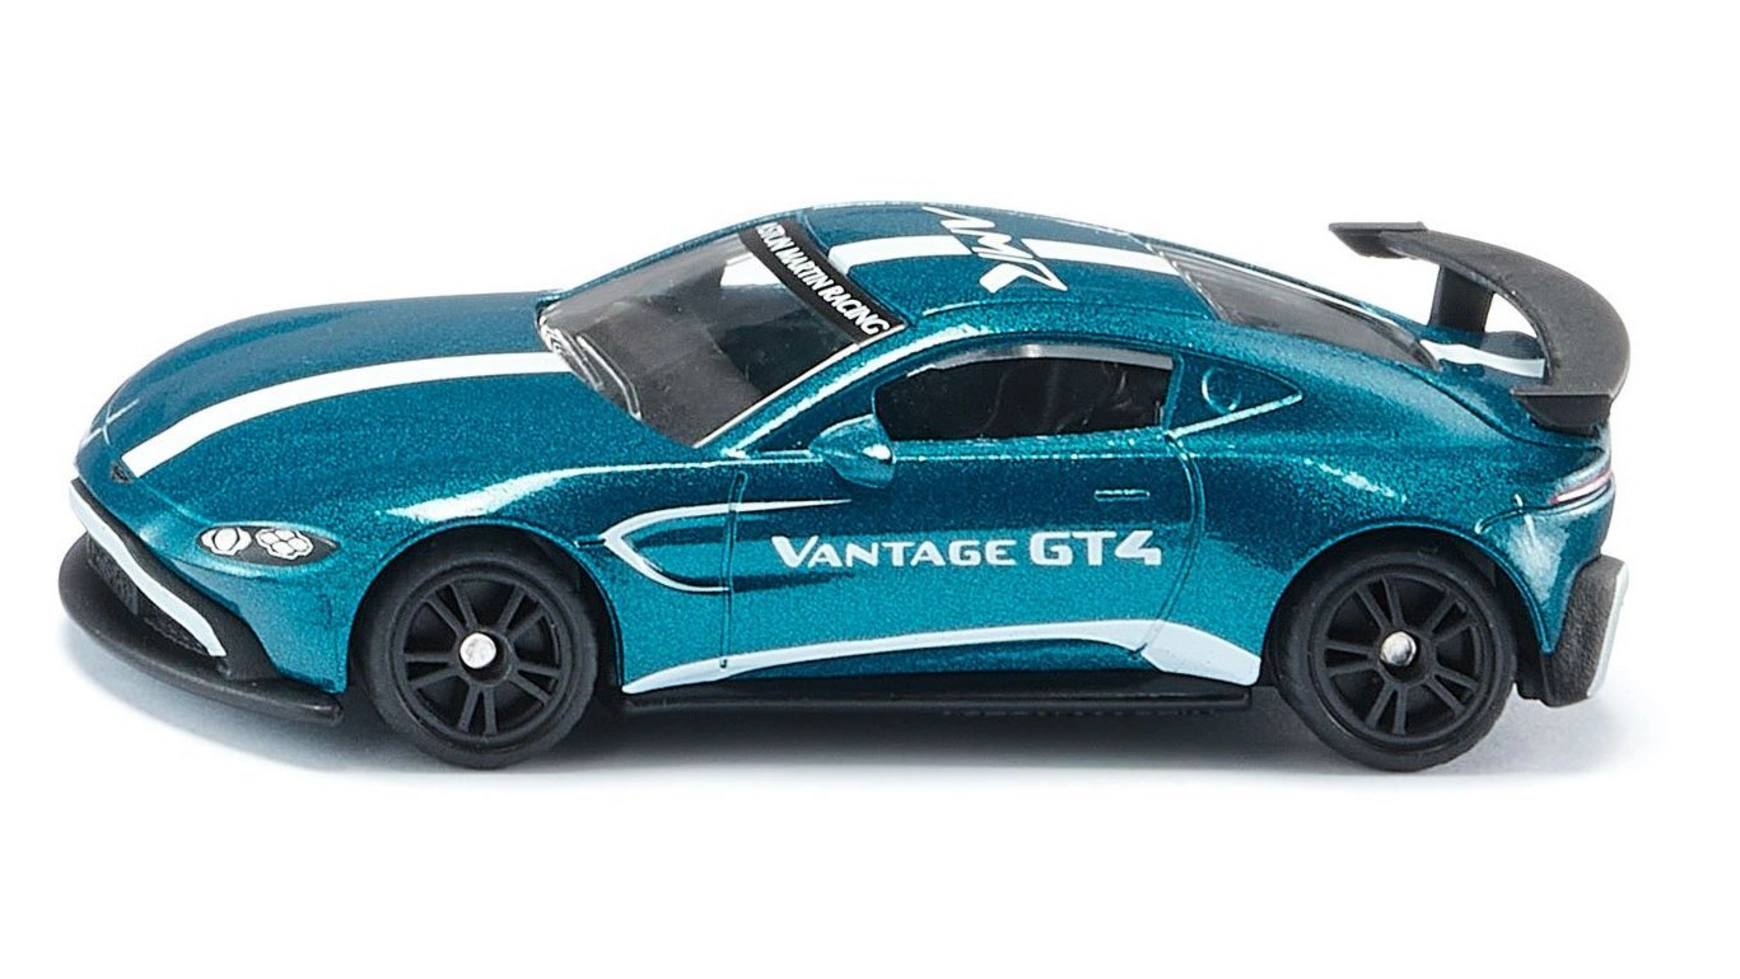 Super aston martin vantage gt4 Siku hot 1 32 scale racing aston vantage martin gt3 diecast sport car metal model with light sound pull back vehicle toys collection